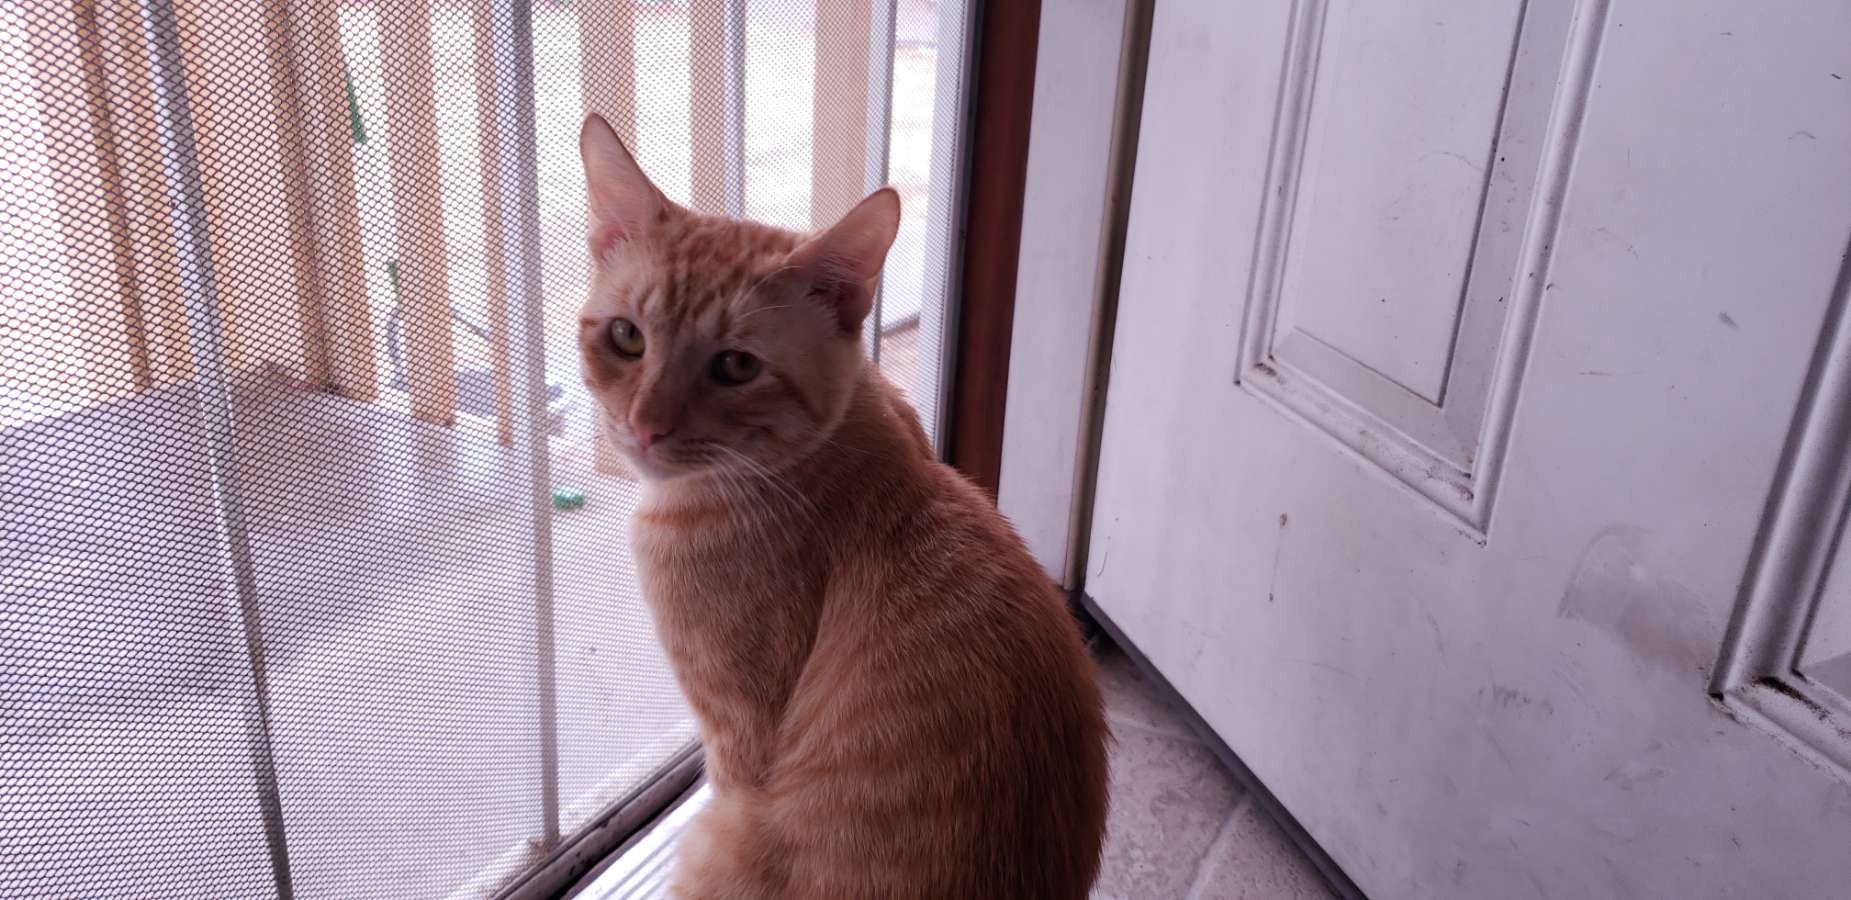 a picture of Rigbanius (Rigby) a cat that needs a foster home.